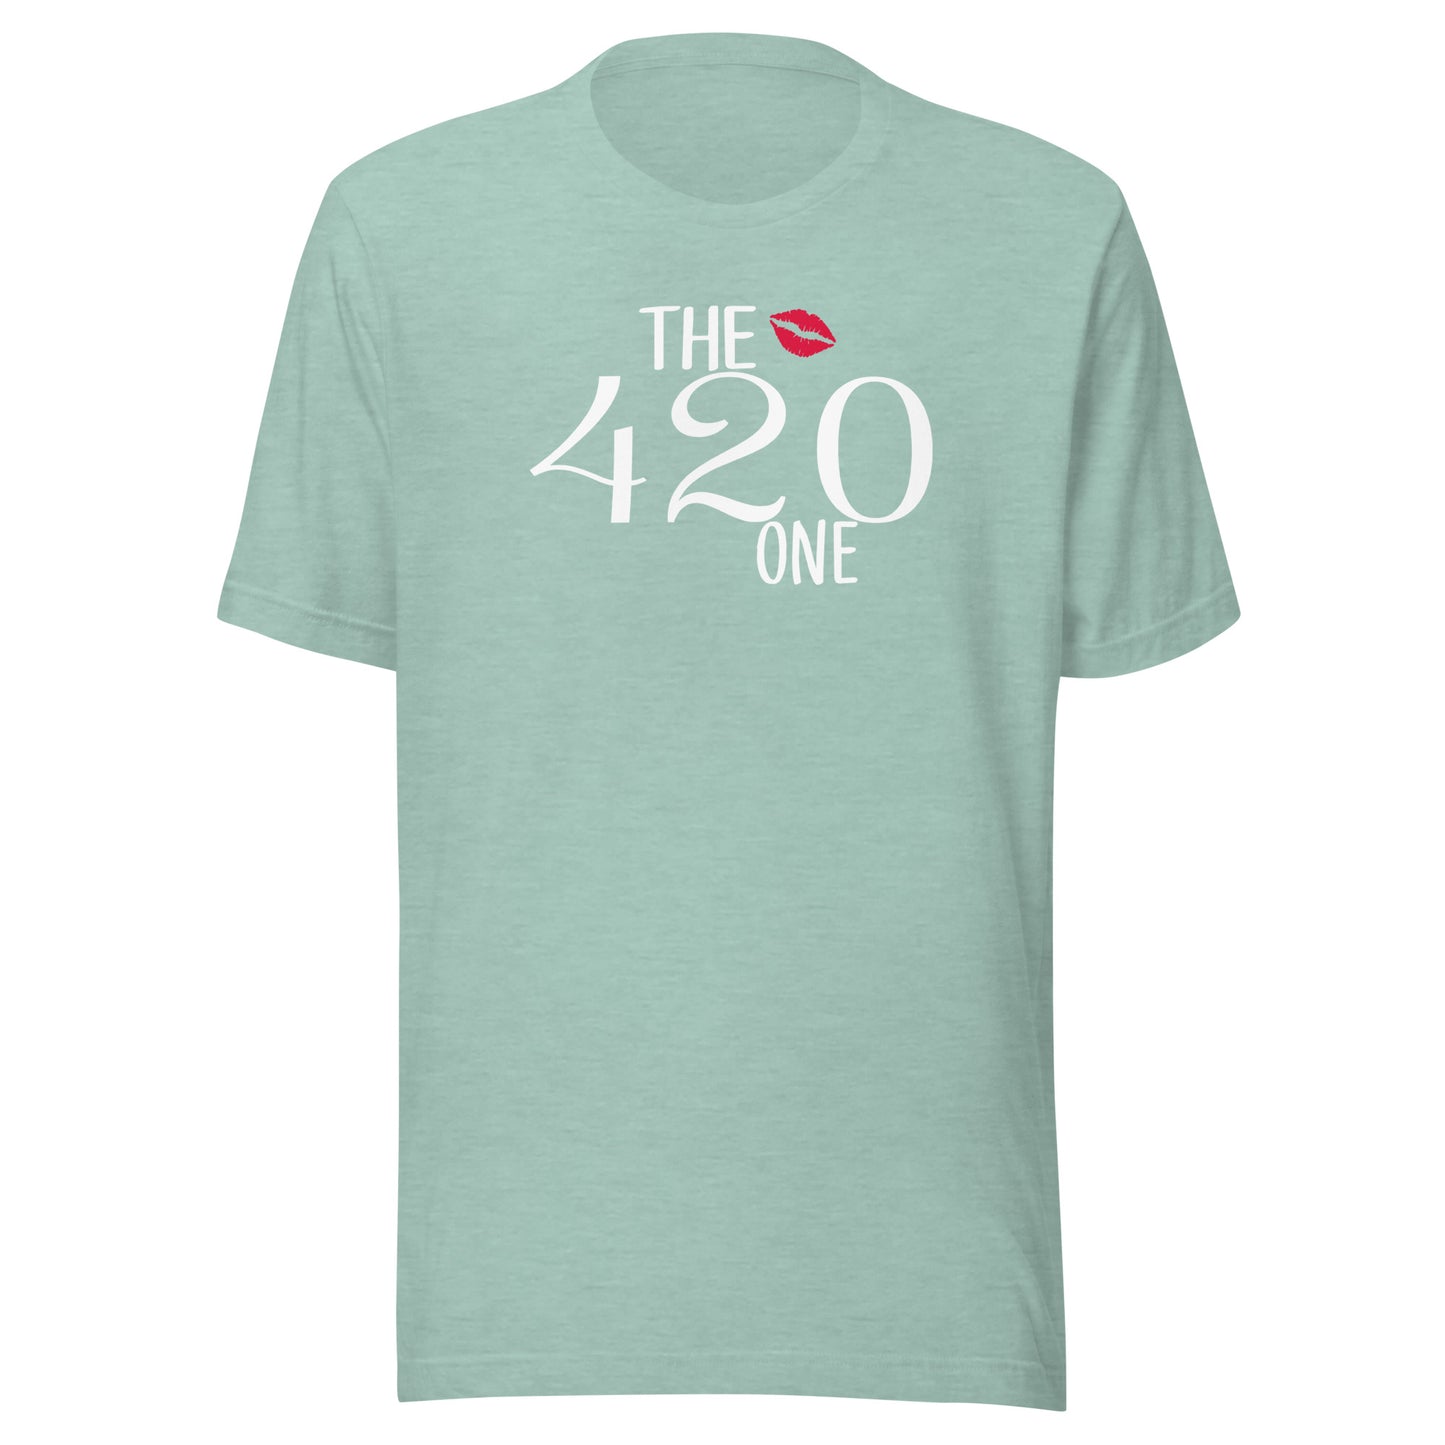 2XL - 3XL The 420 One (white letters)